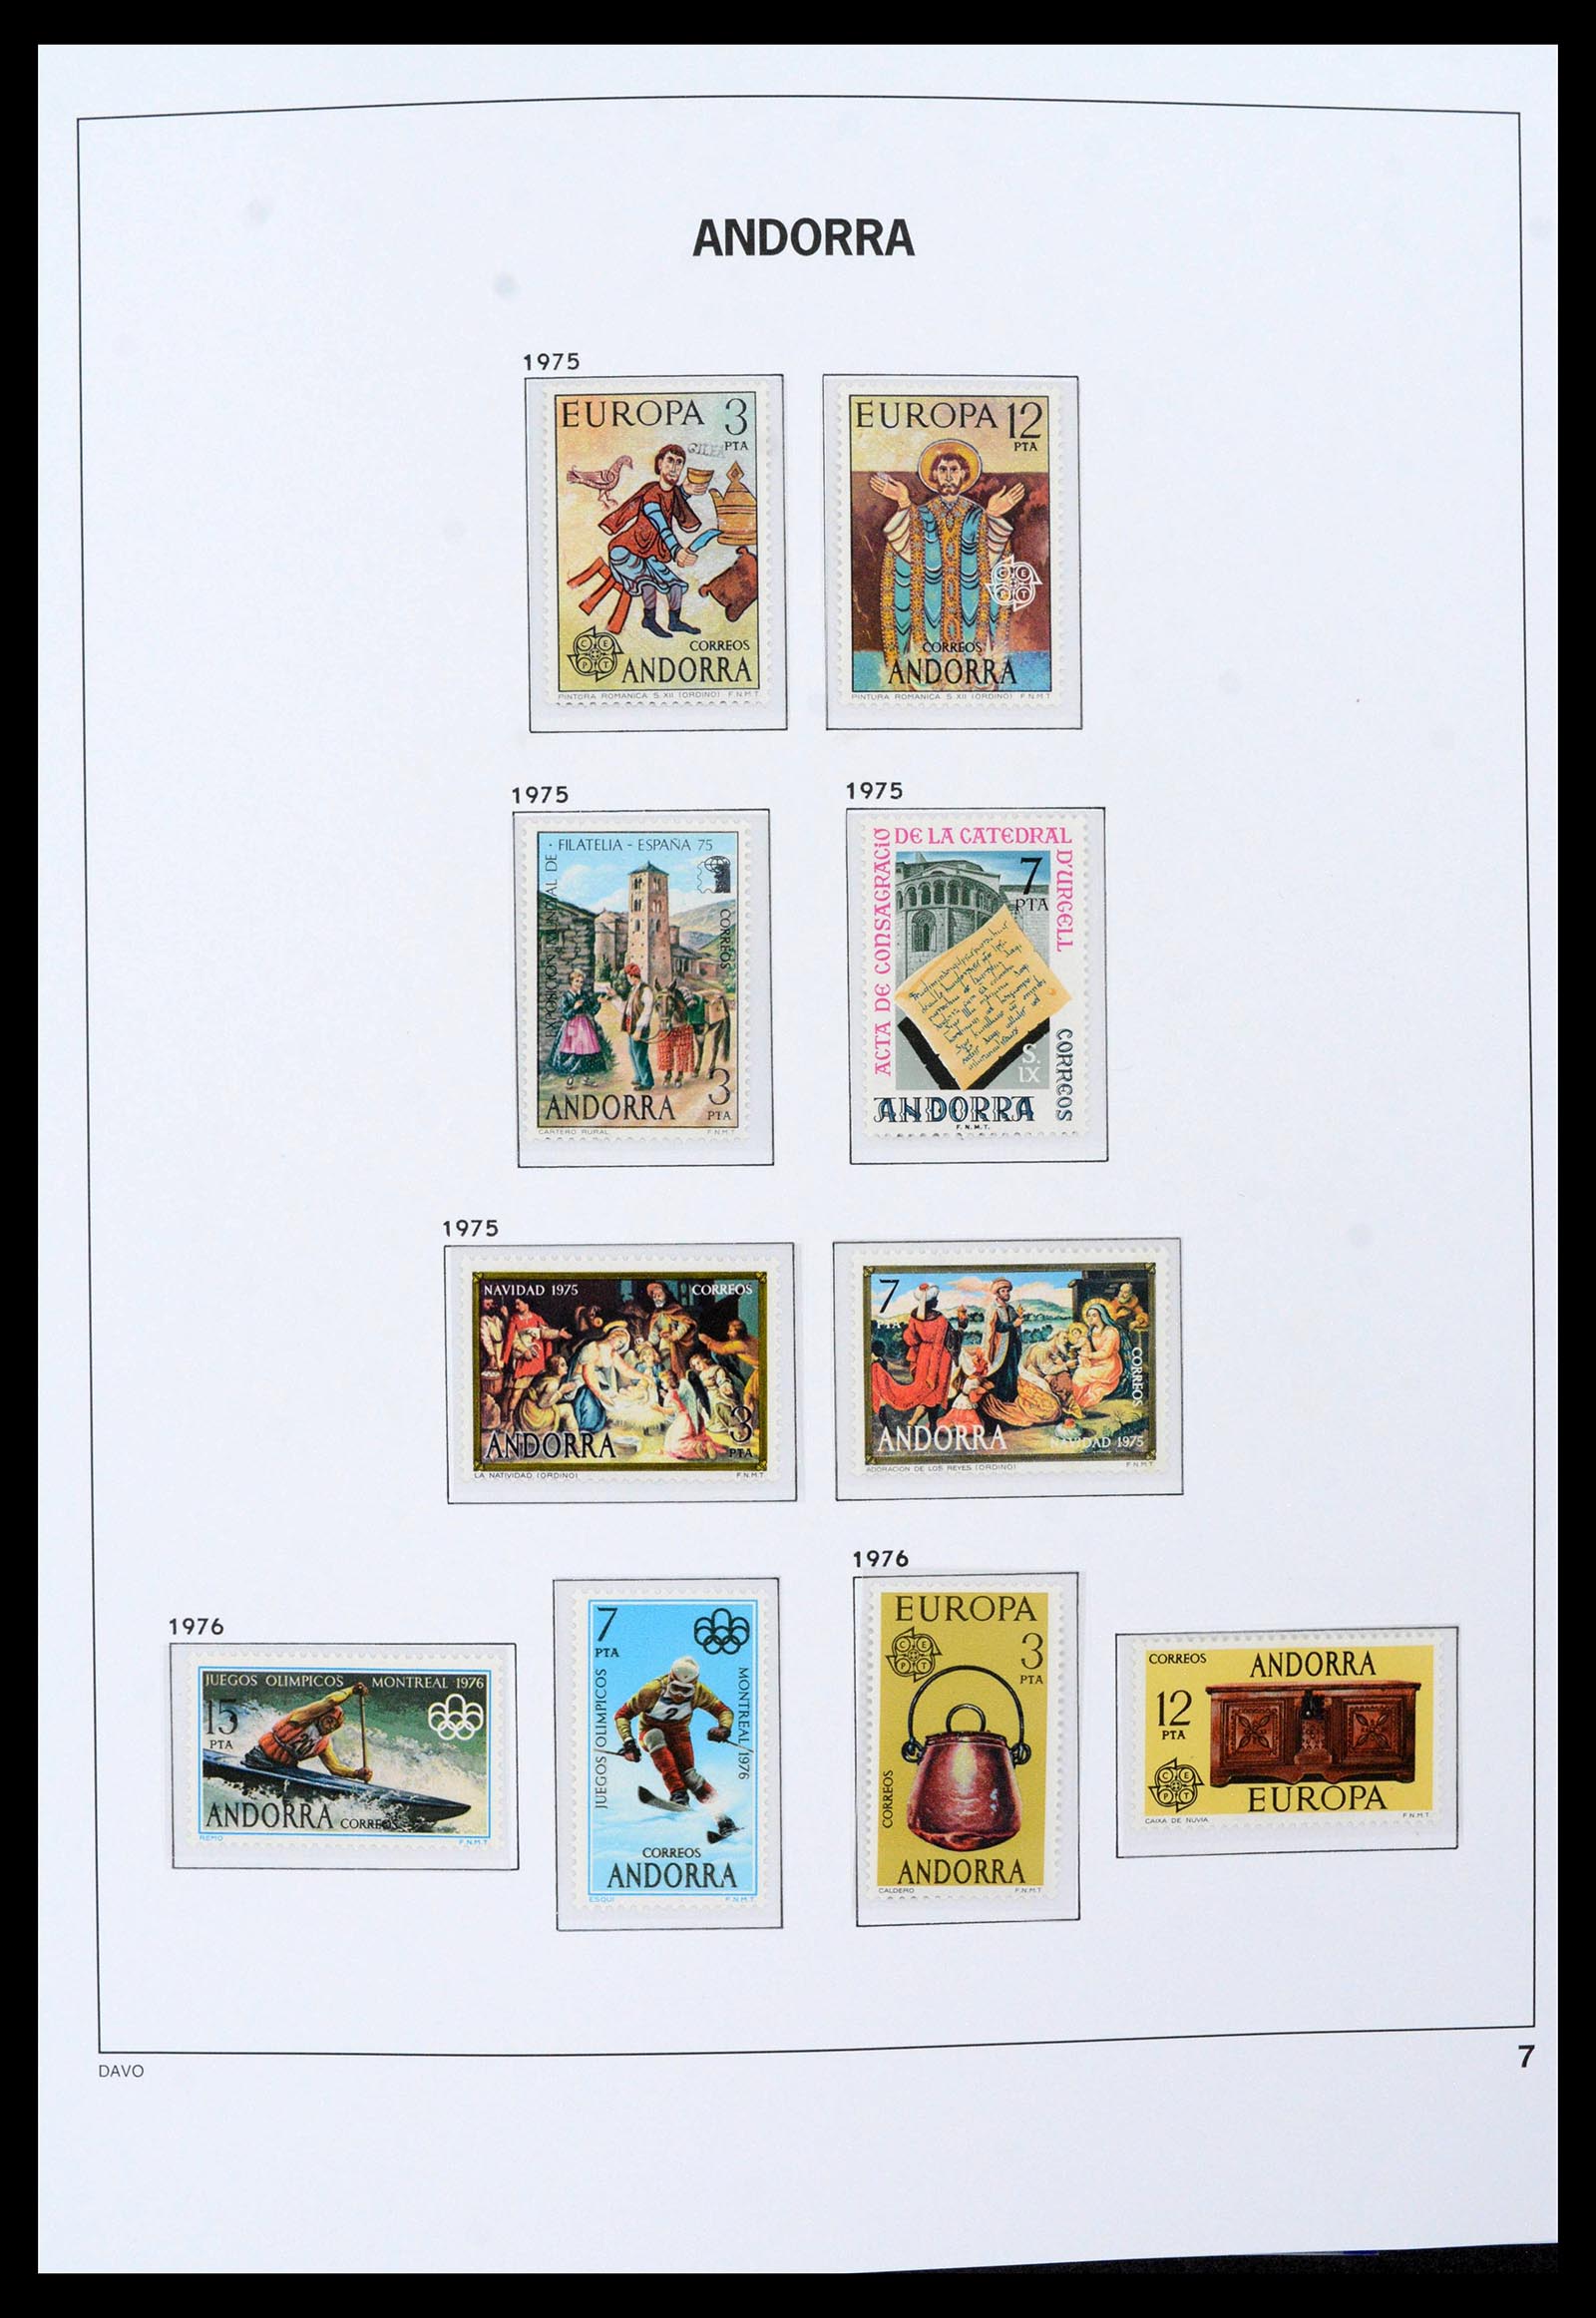 39388 0070 - Stamp collection 39388 Spanish Andorra 1928-2019!